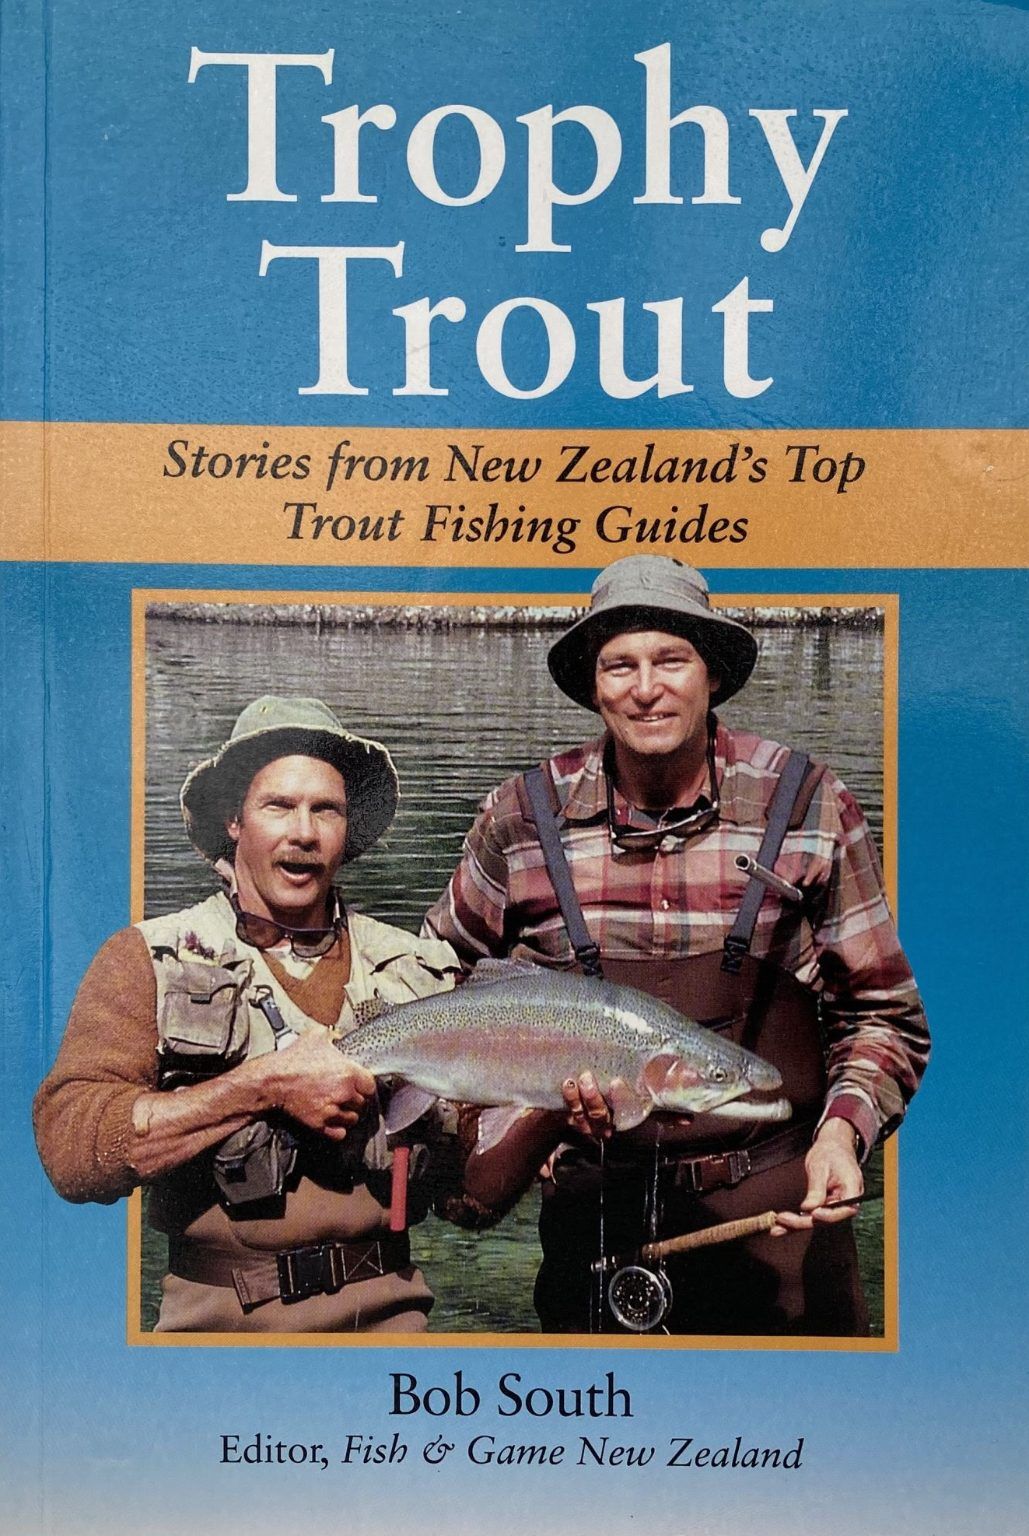 TROPHY TROUT: Stories from New Zealand's Top Trout Fishing Guides